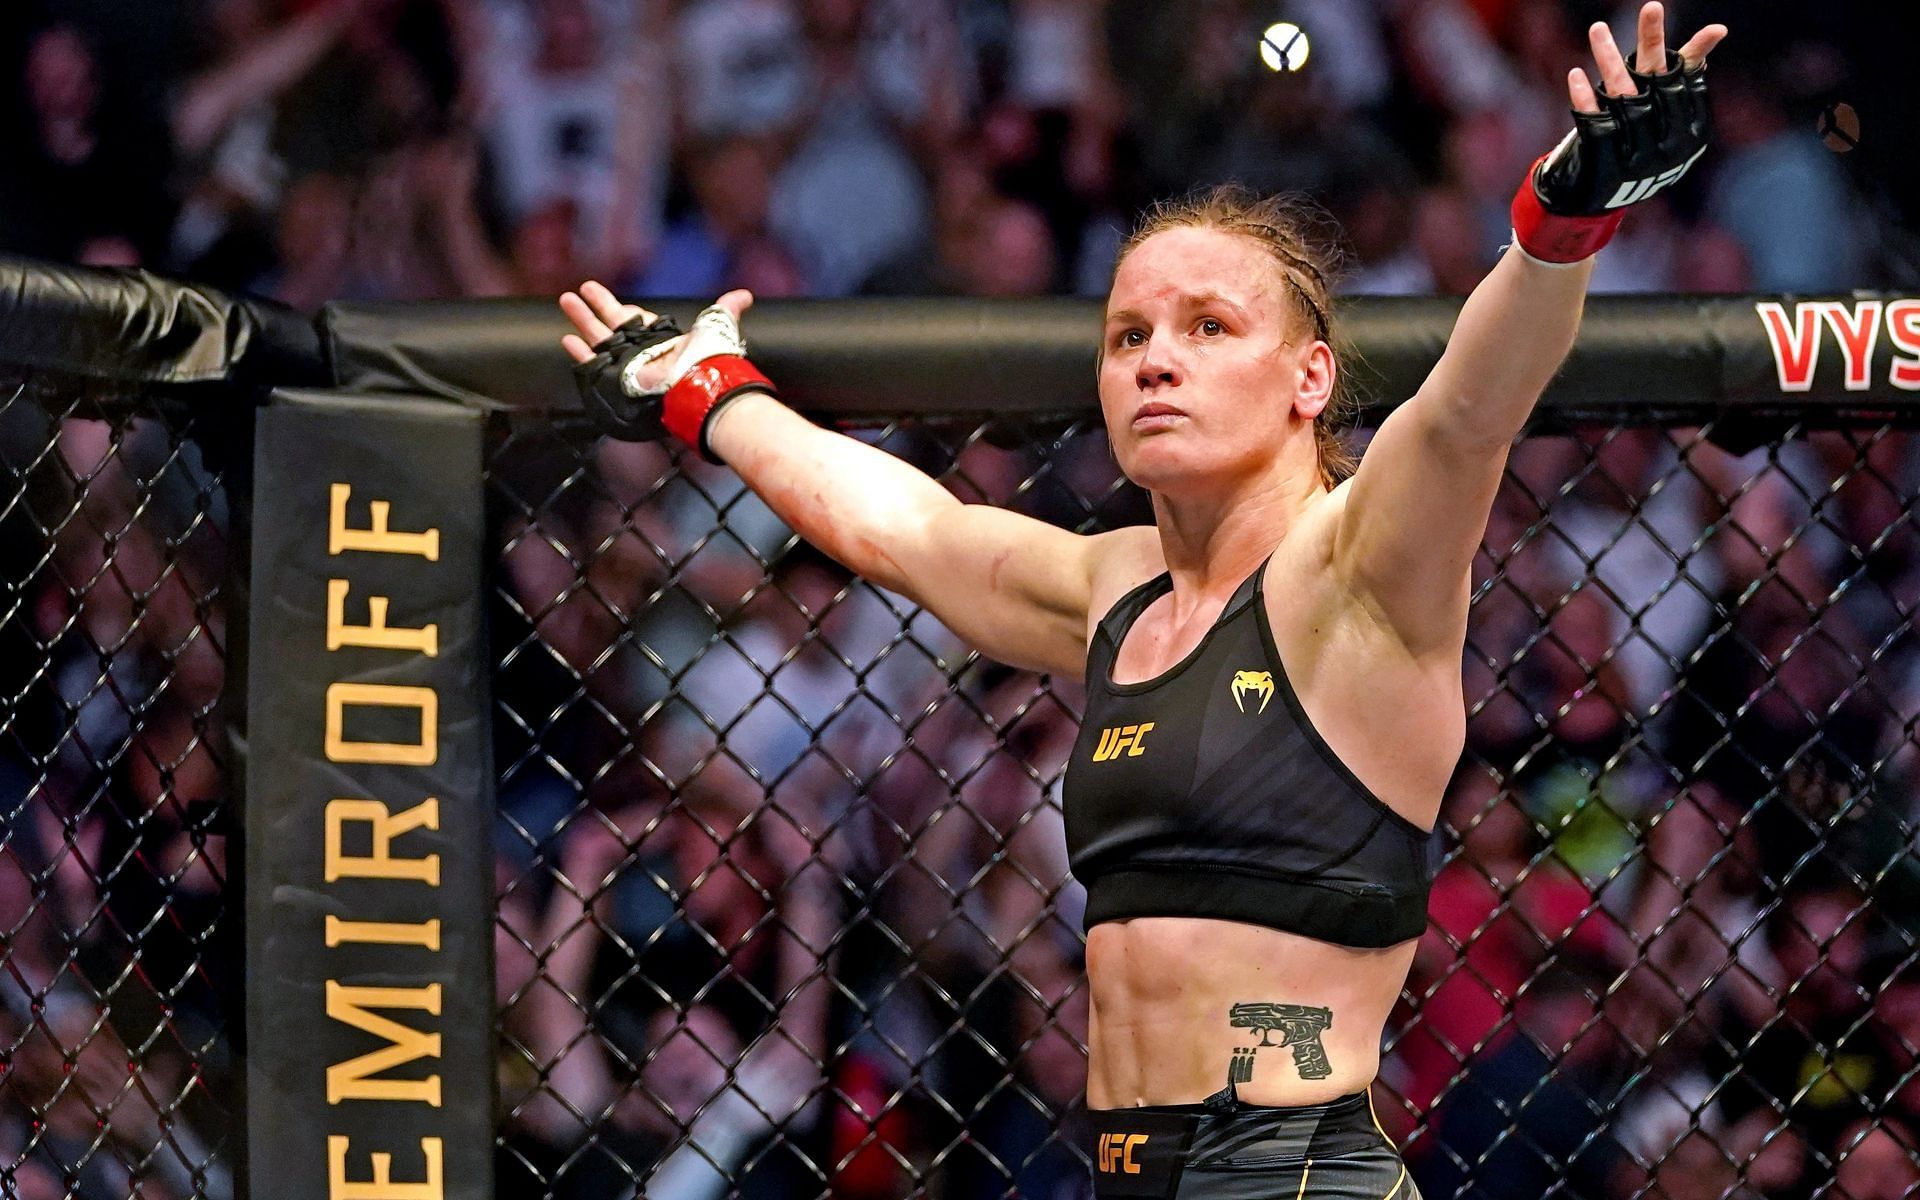 Should Valentina Shevchenko move up to 135lbs if she defends her flyweight crown at UFC 275?